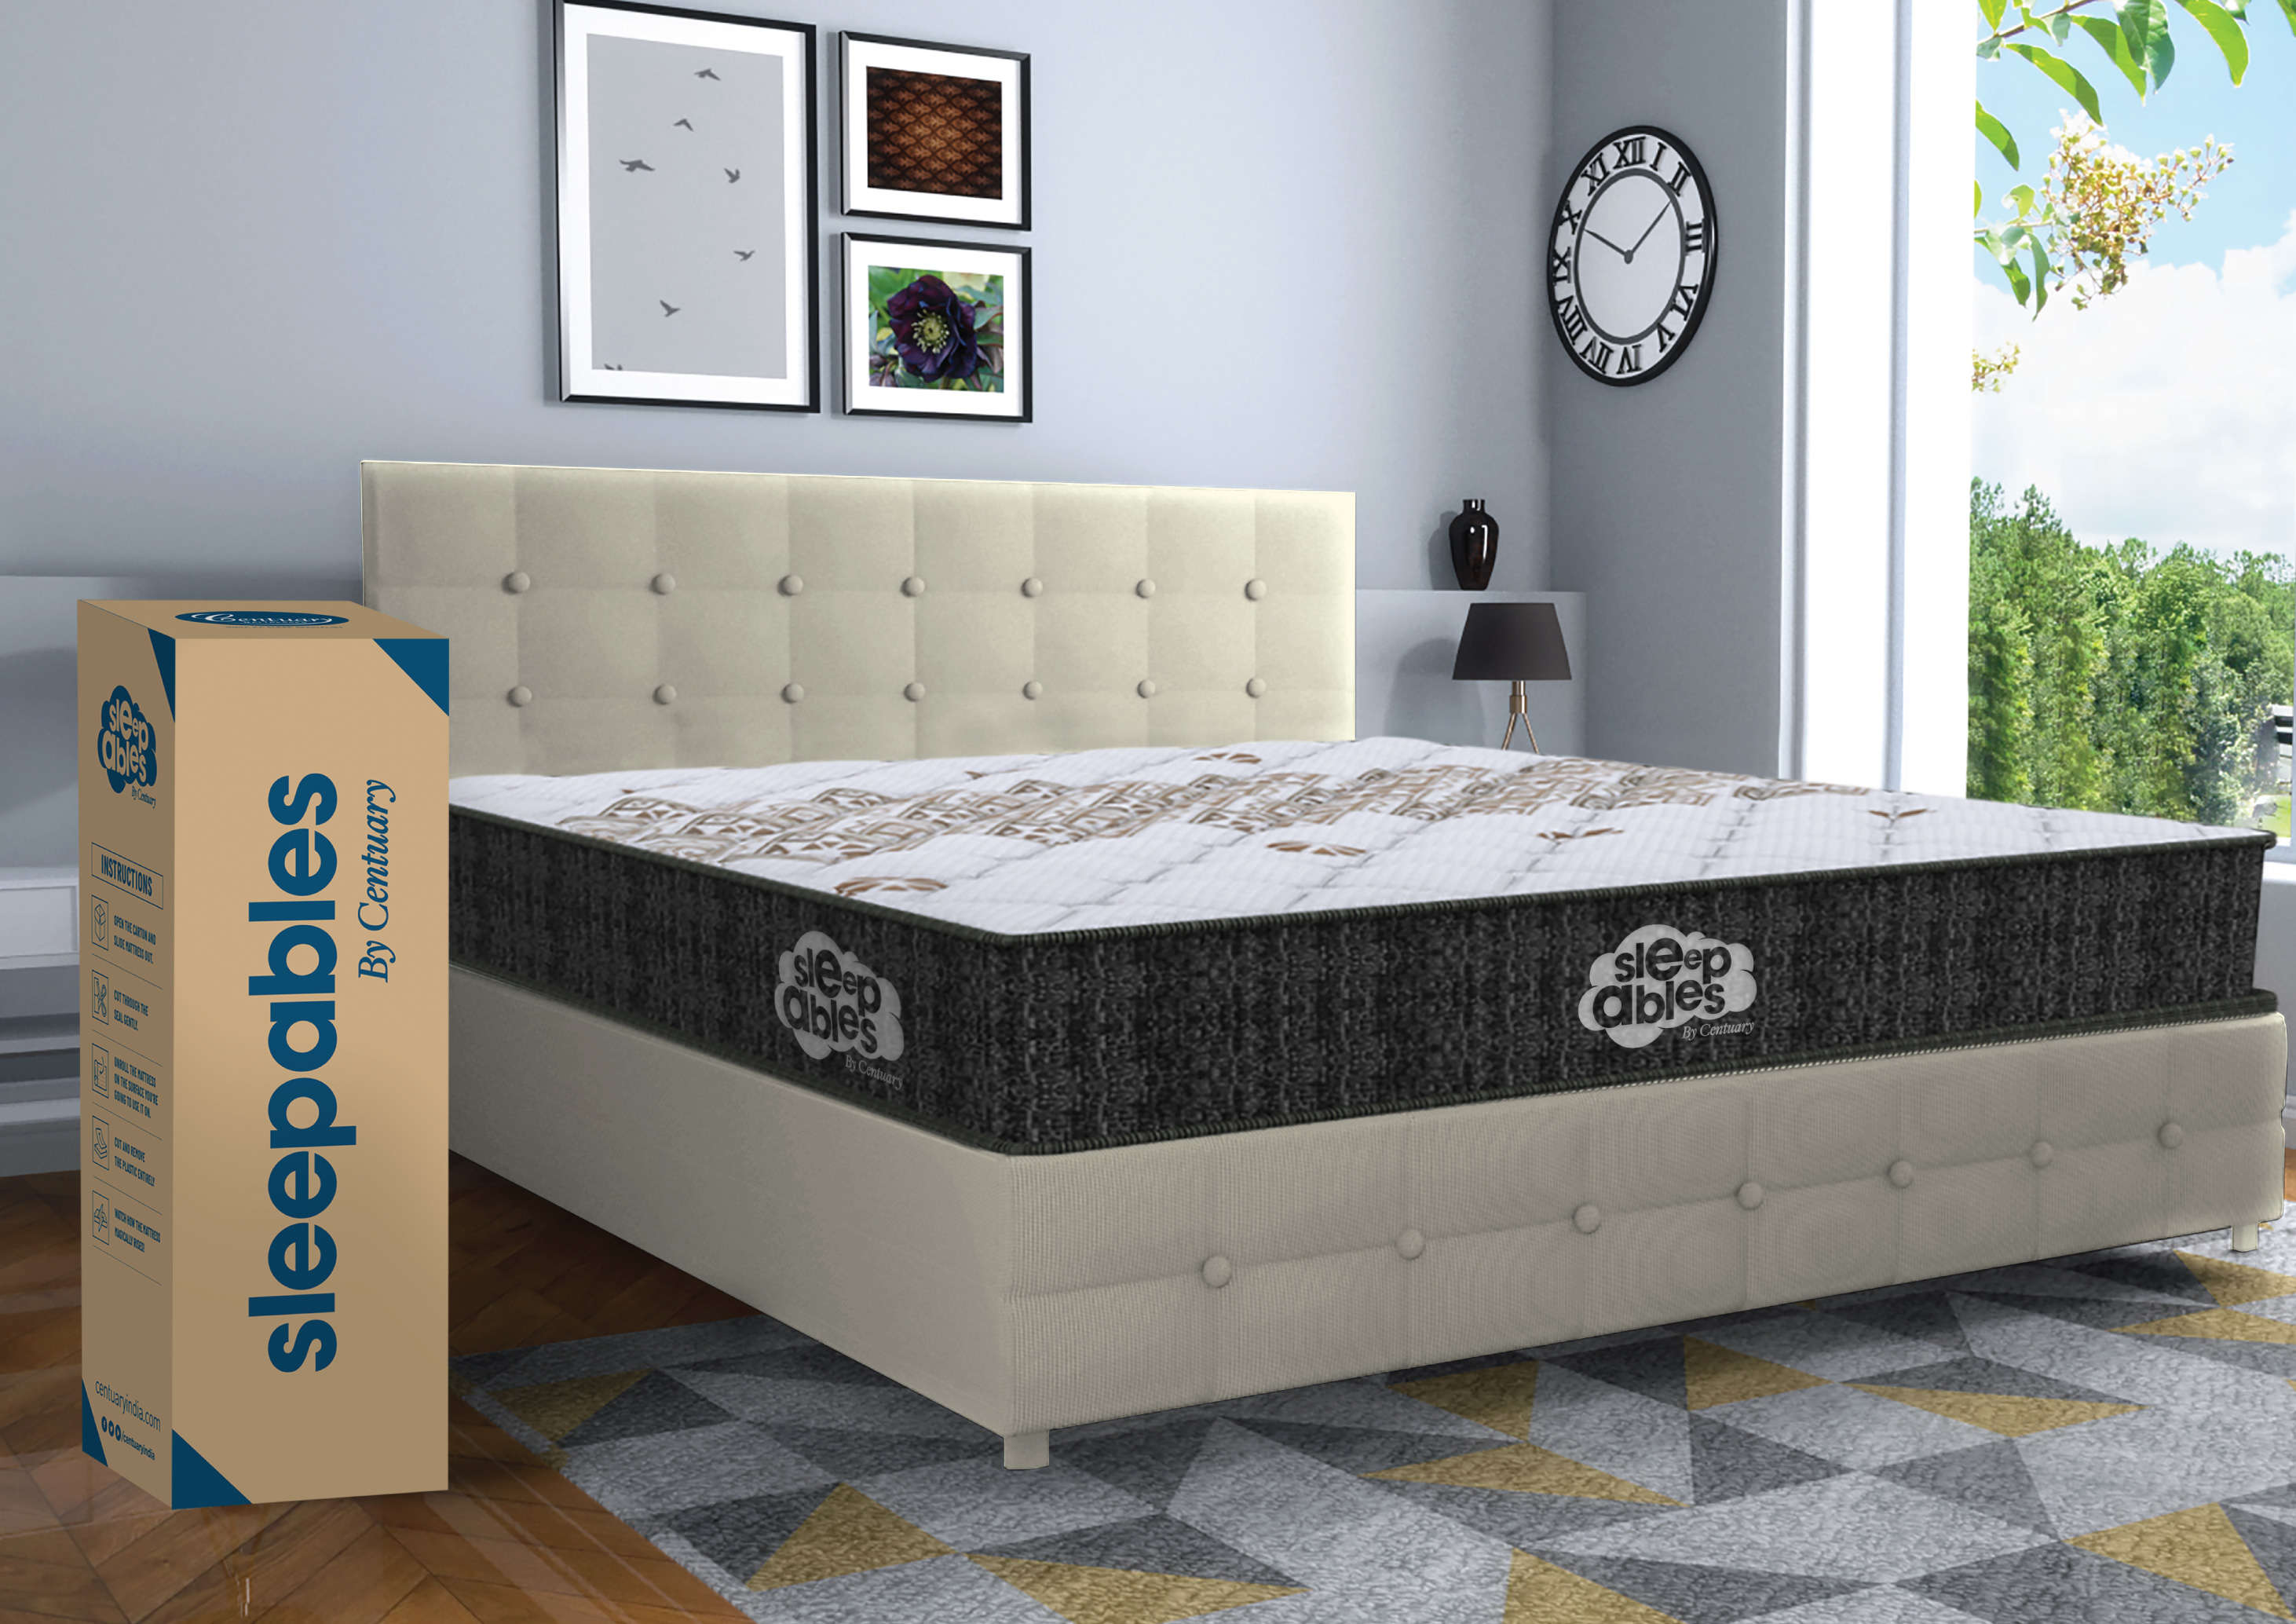 centuary mattress price list with images